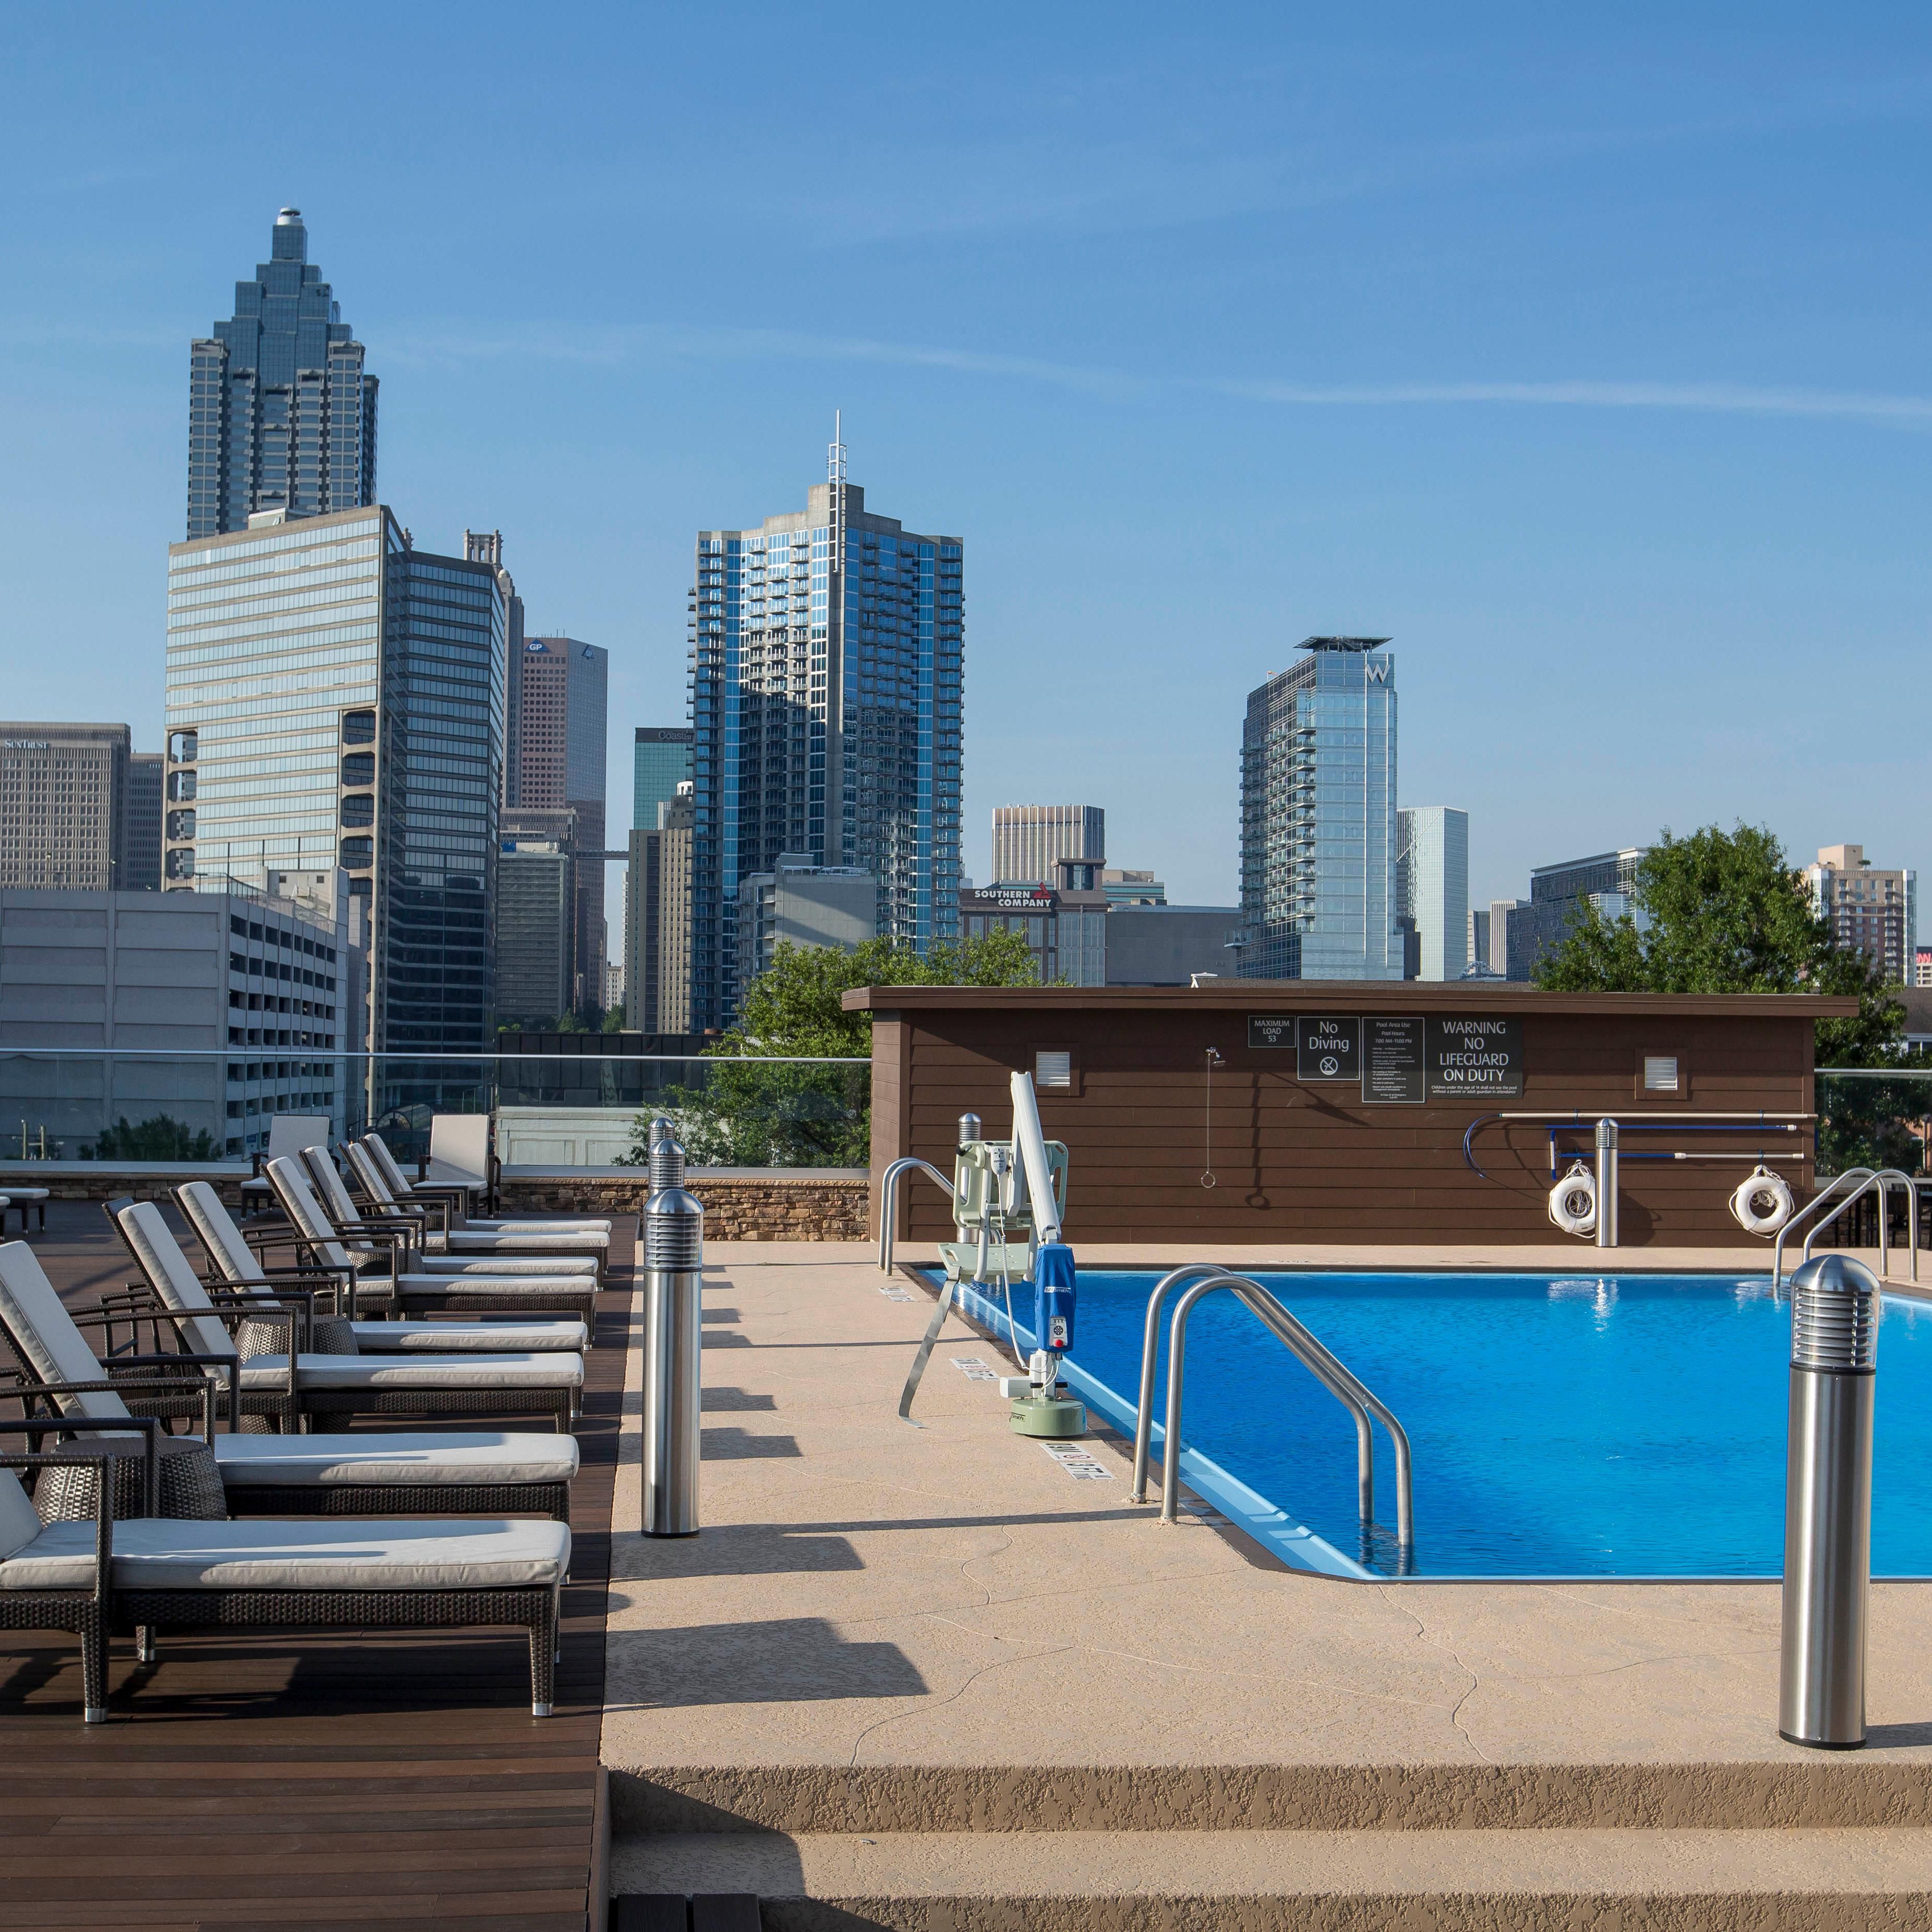 Have a morning dip in our seasonal outdoor rooftop pool